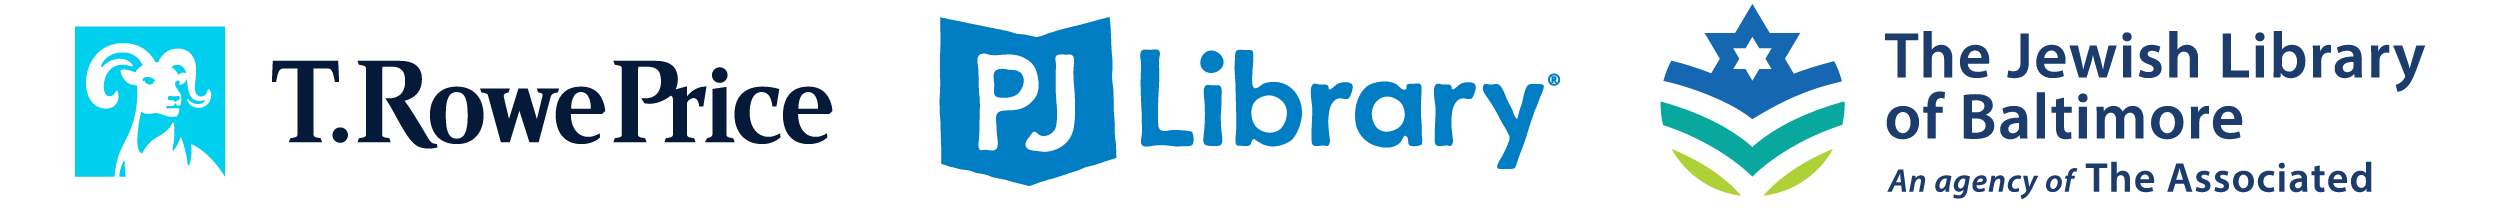 T Rowe Price, PJ Library, and the Jewish Library Logos